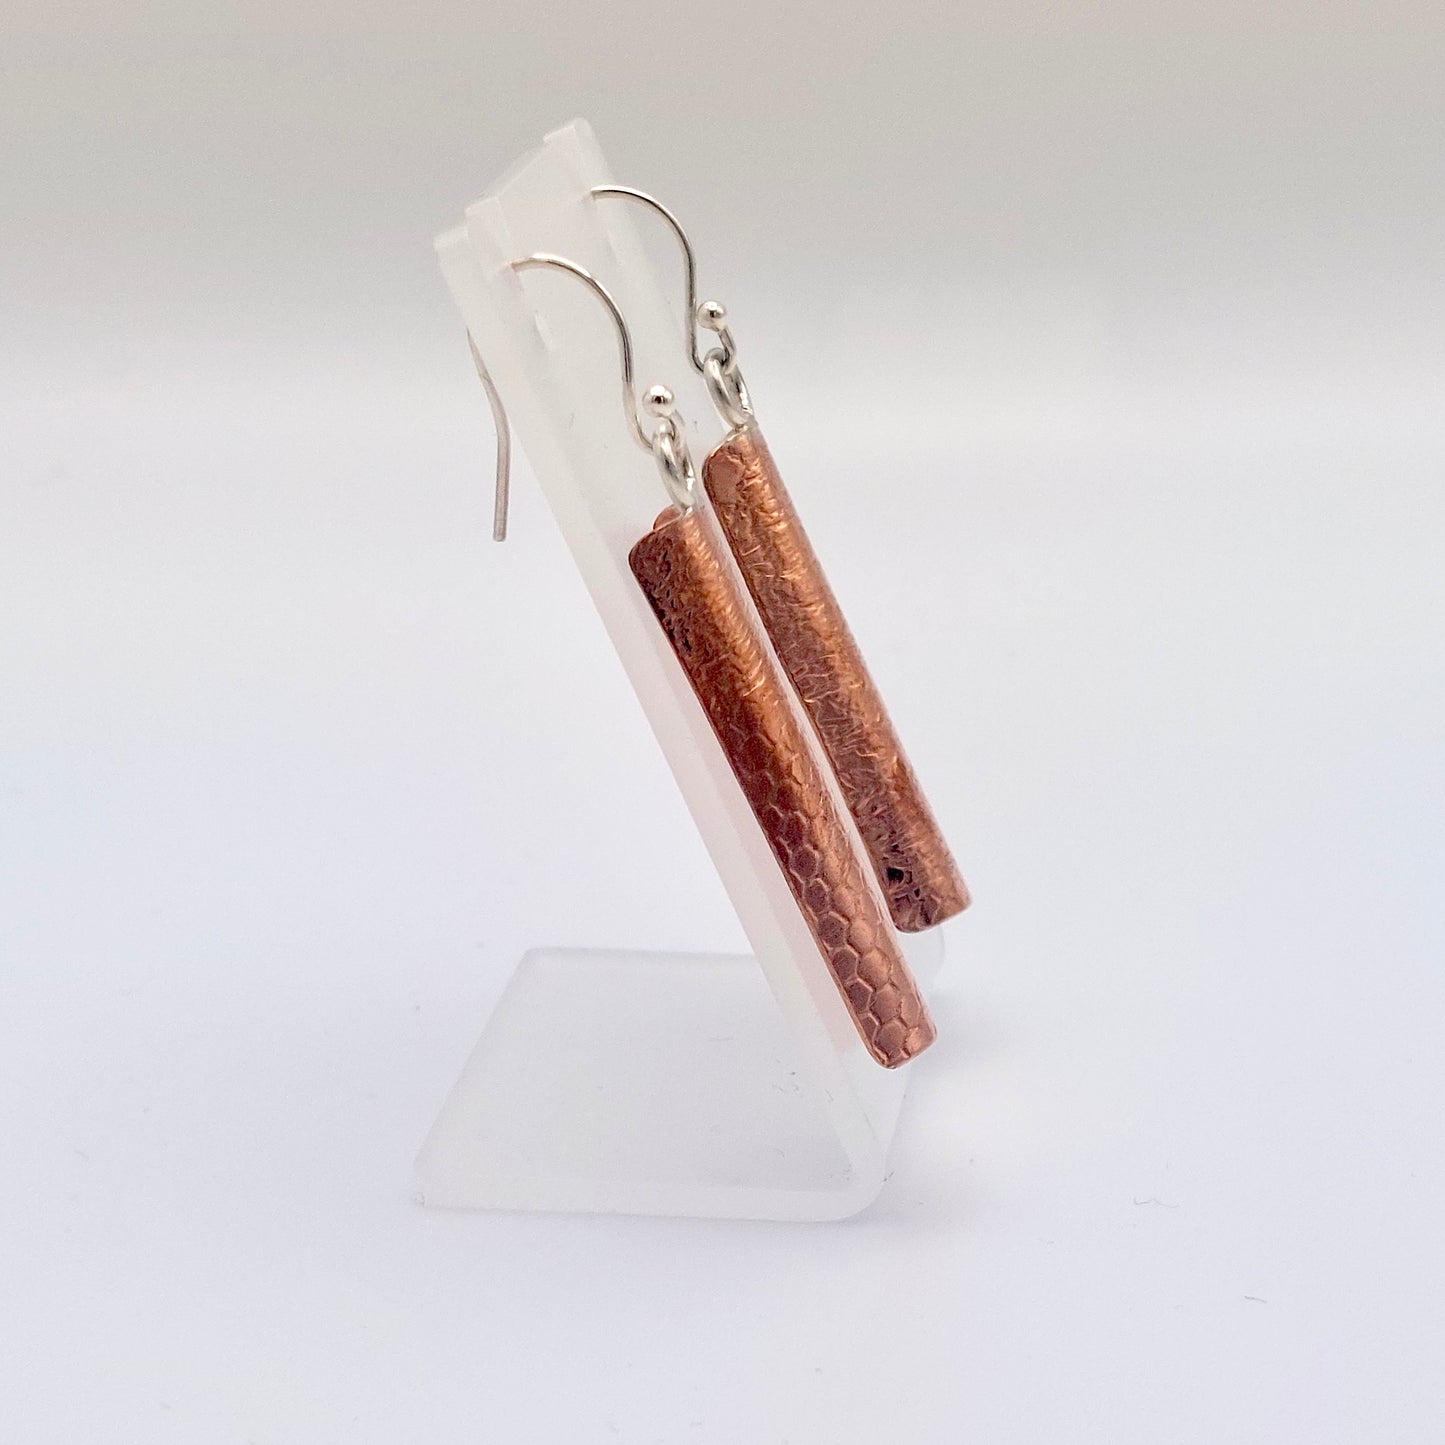 Curved and Textured Copper Earrings